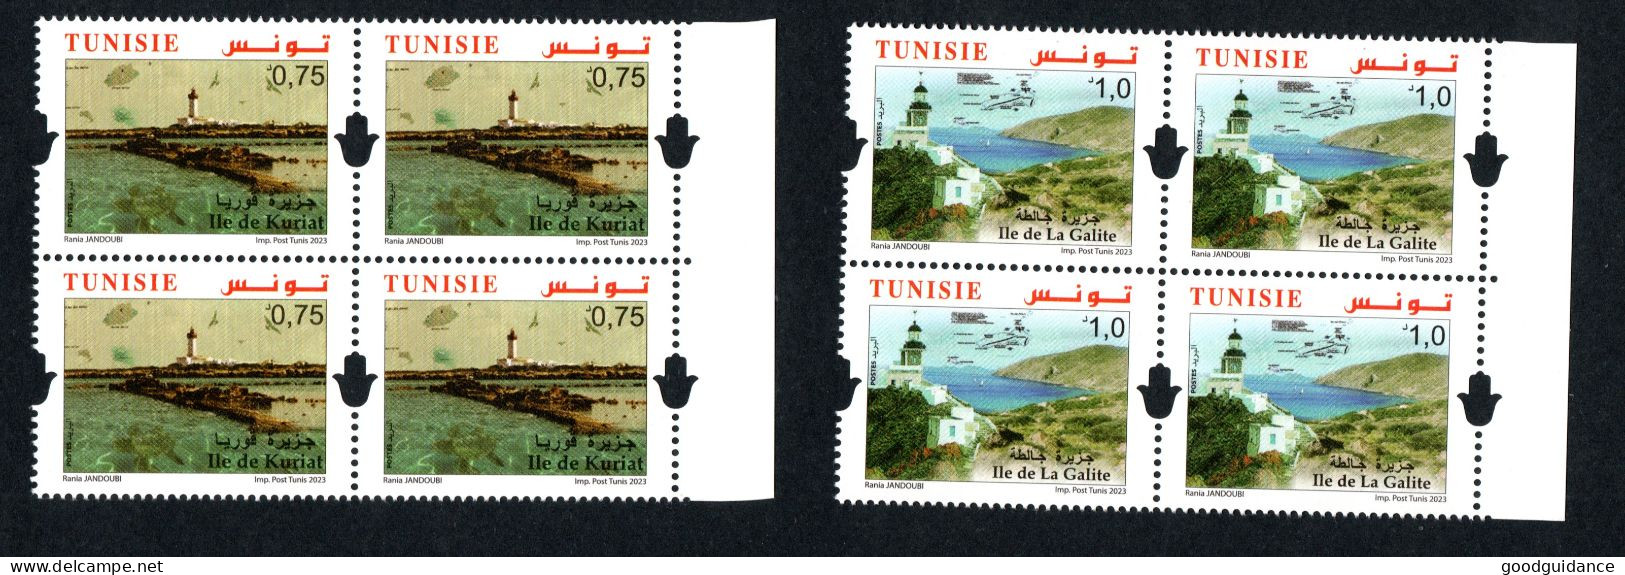 2023- Tunisia - Islands : Kuriat - Galite - Lighthouses - Sea Turtle -  Block Of 4 Stamps - Complete Set 2v.MNH** - Isole